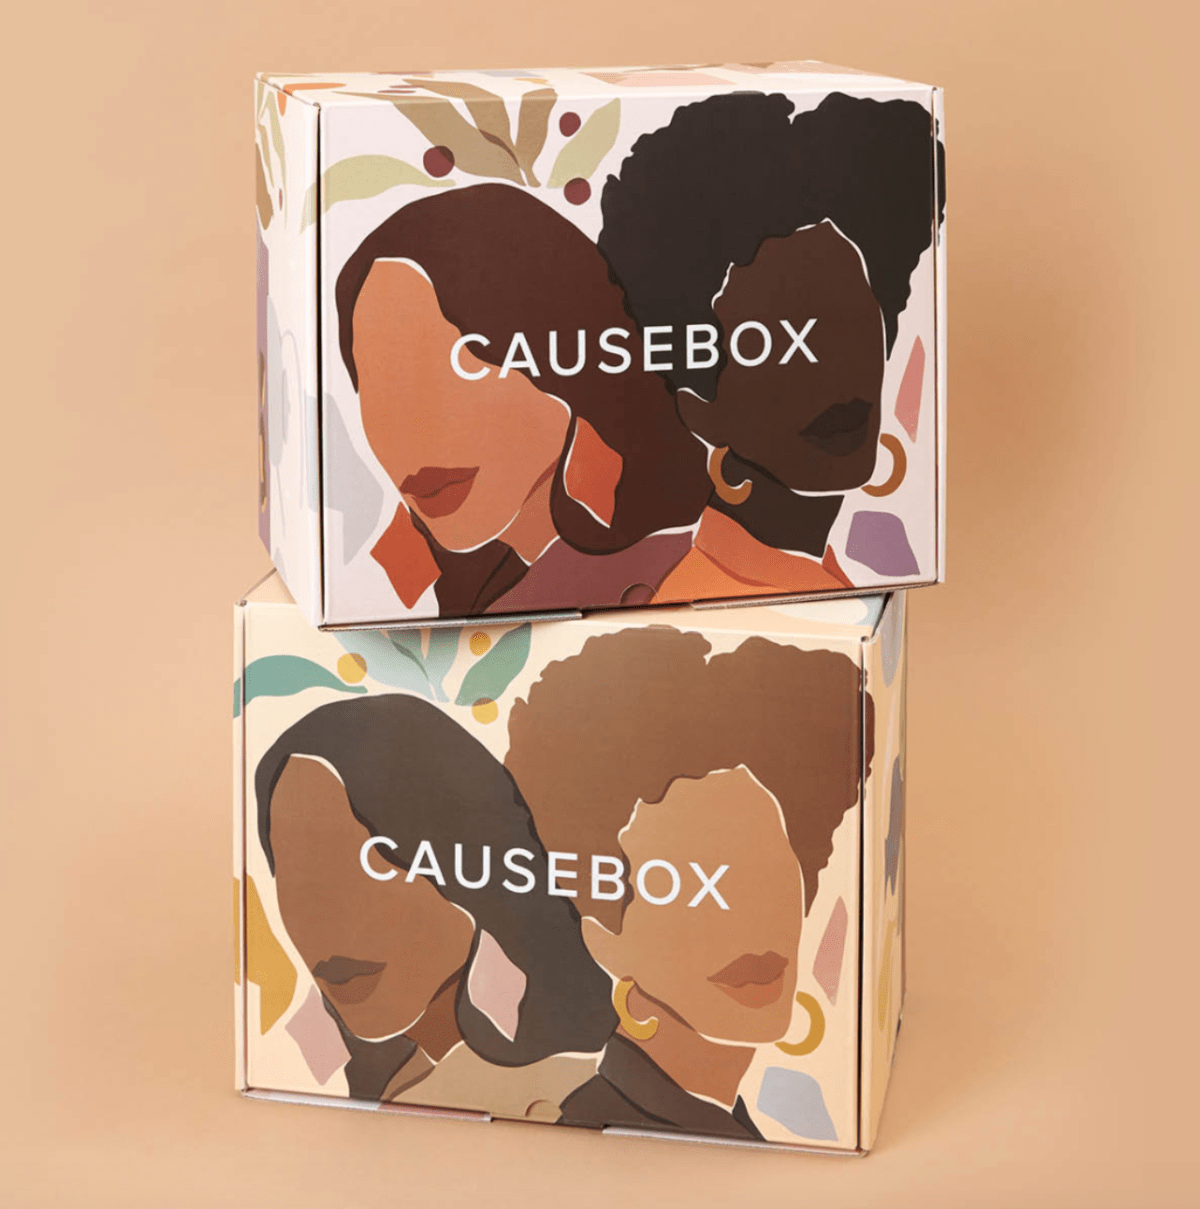 CAUSEBOX Black Friday Sale – Get Your First Box for $29.95 or First Box FREE with Annual Subscription.